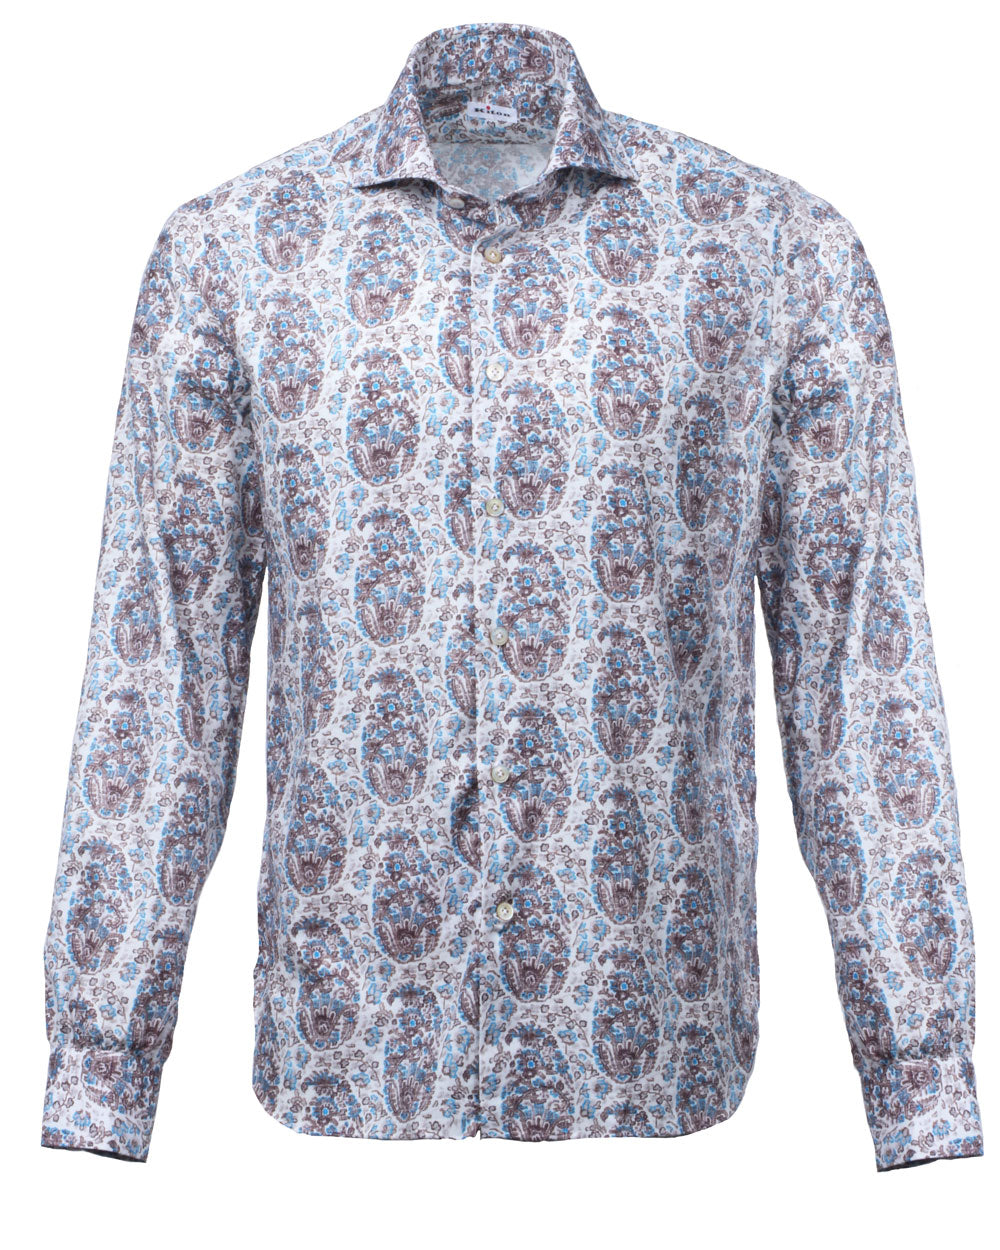 Turquoise Tapestry Print Sportshirt